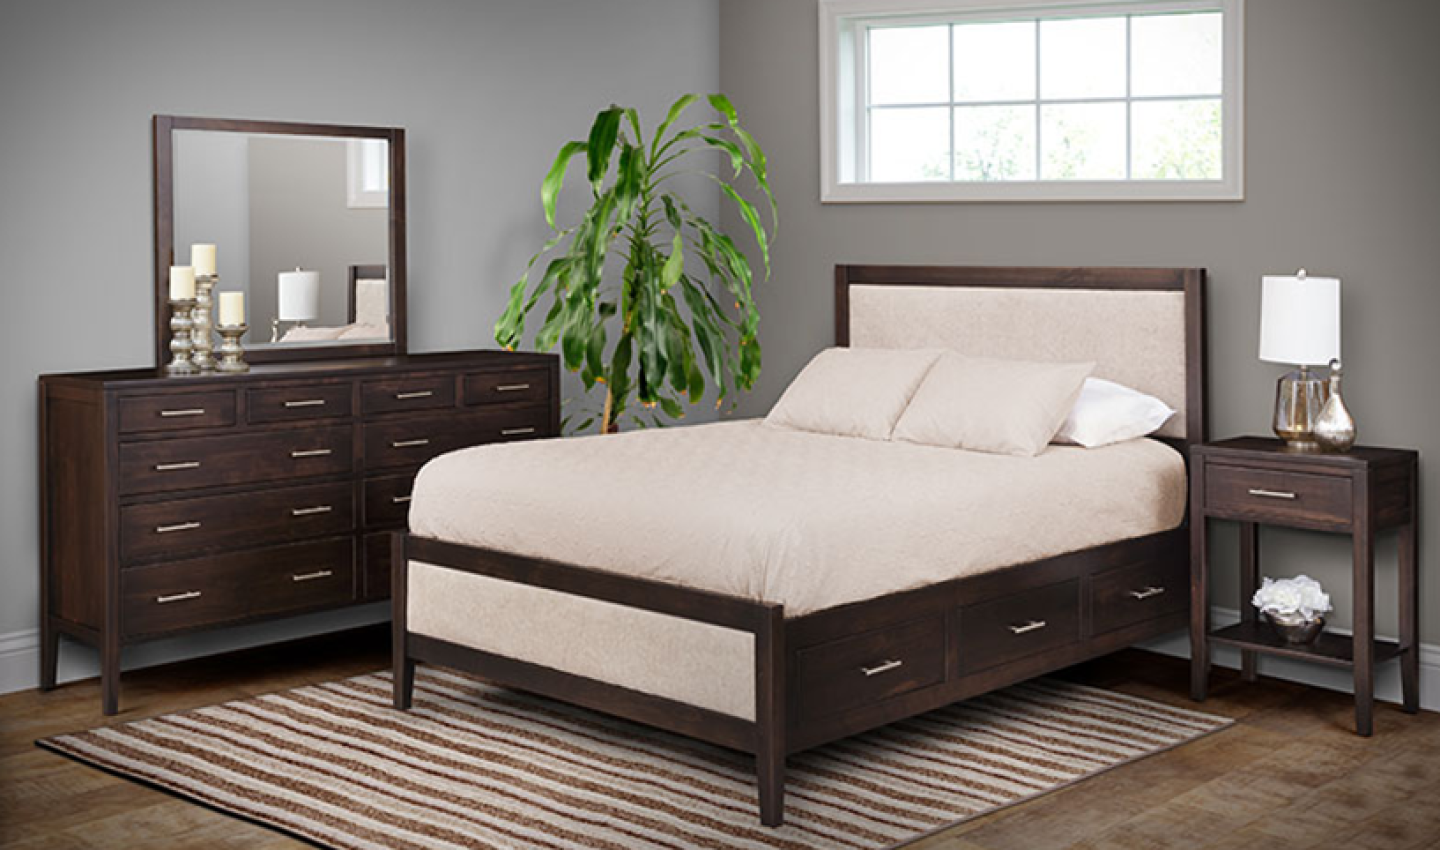 Explore Popular Bed Frame Styles